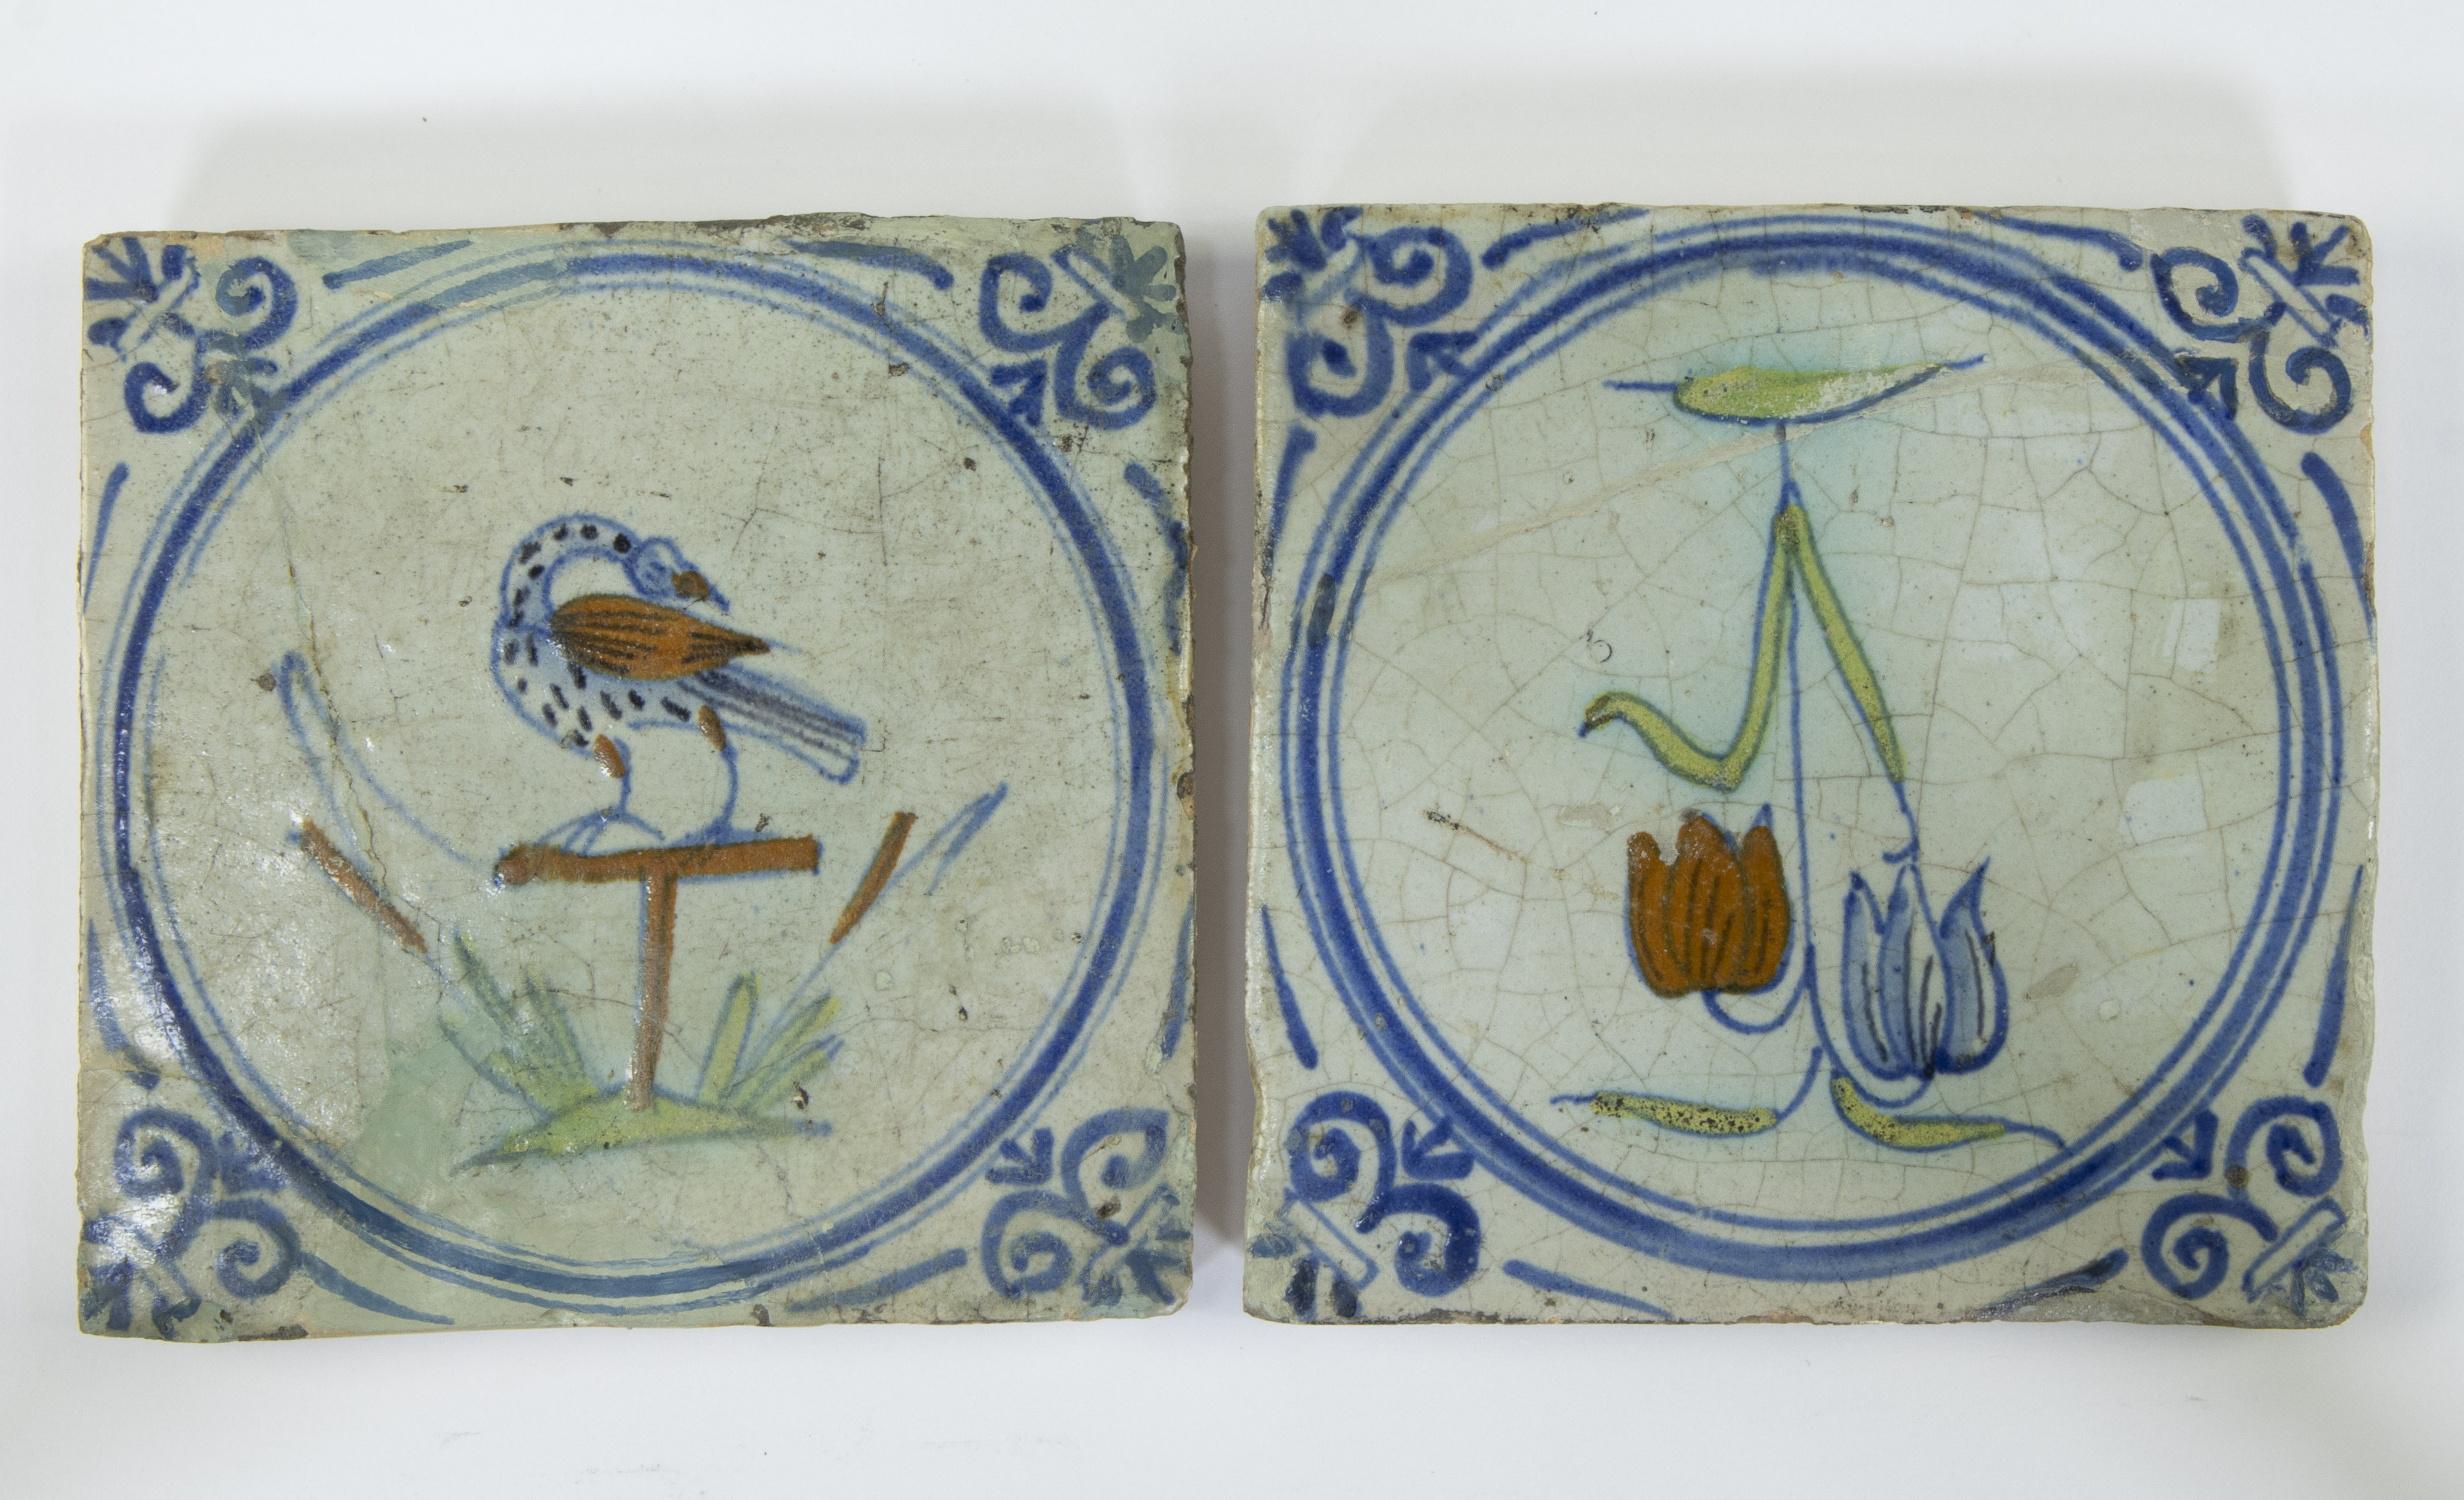 2 Delft tiles and an inkwell, 18th century - Image 3 of 6